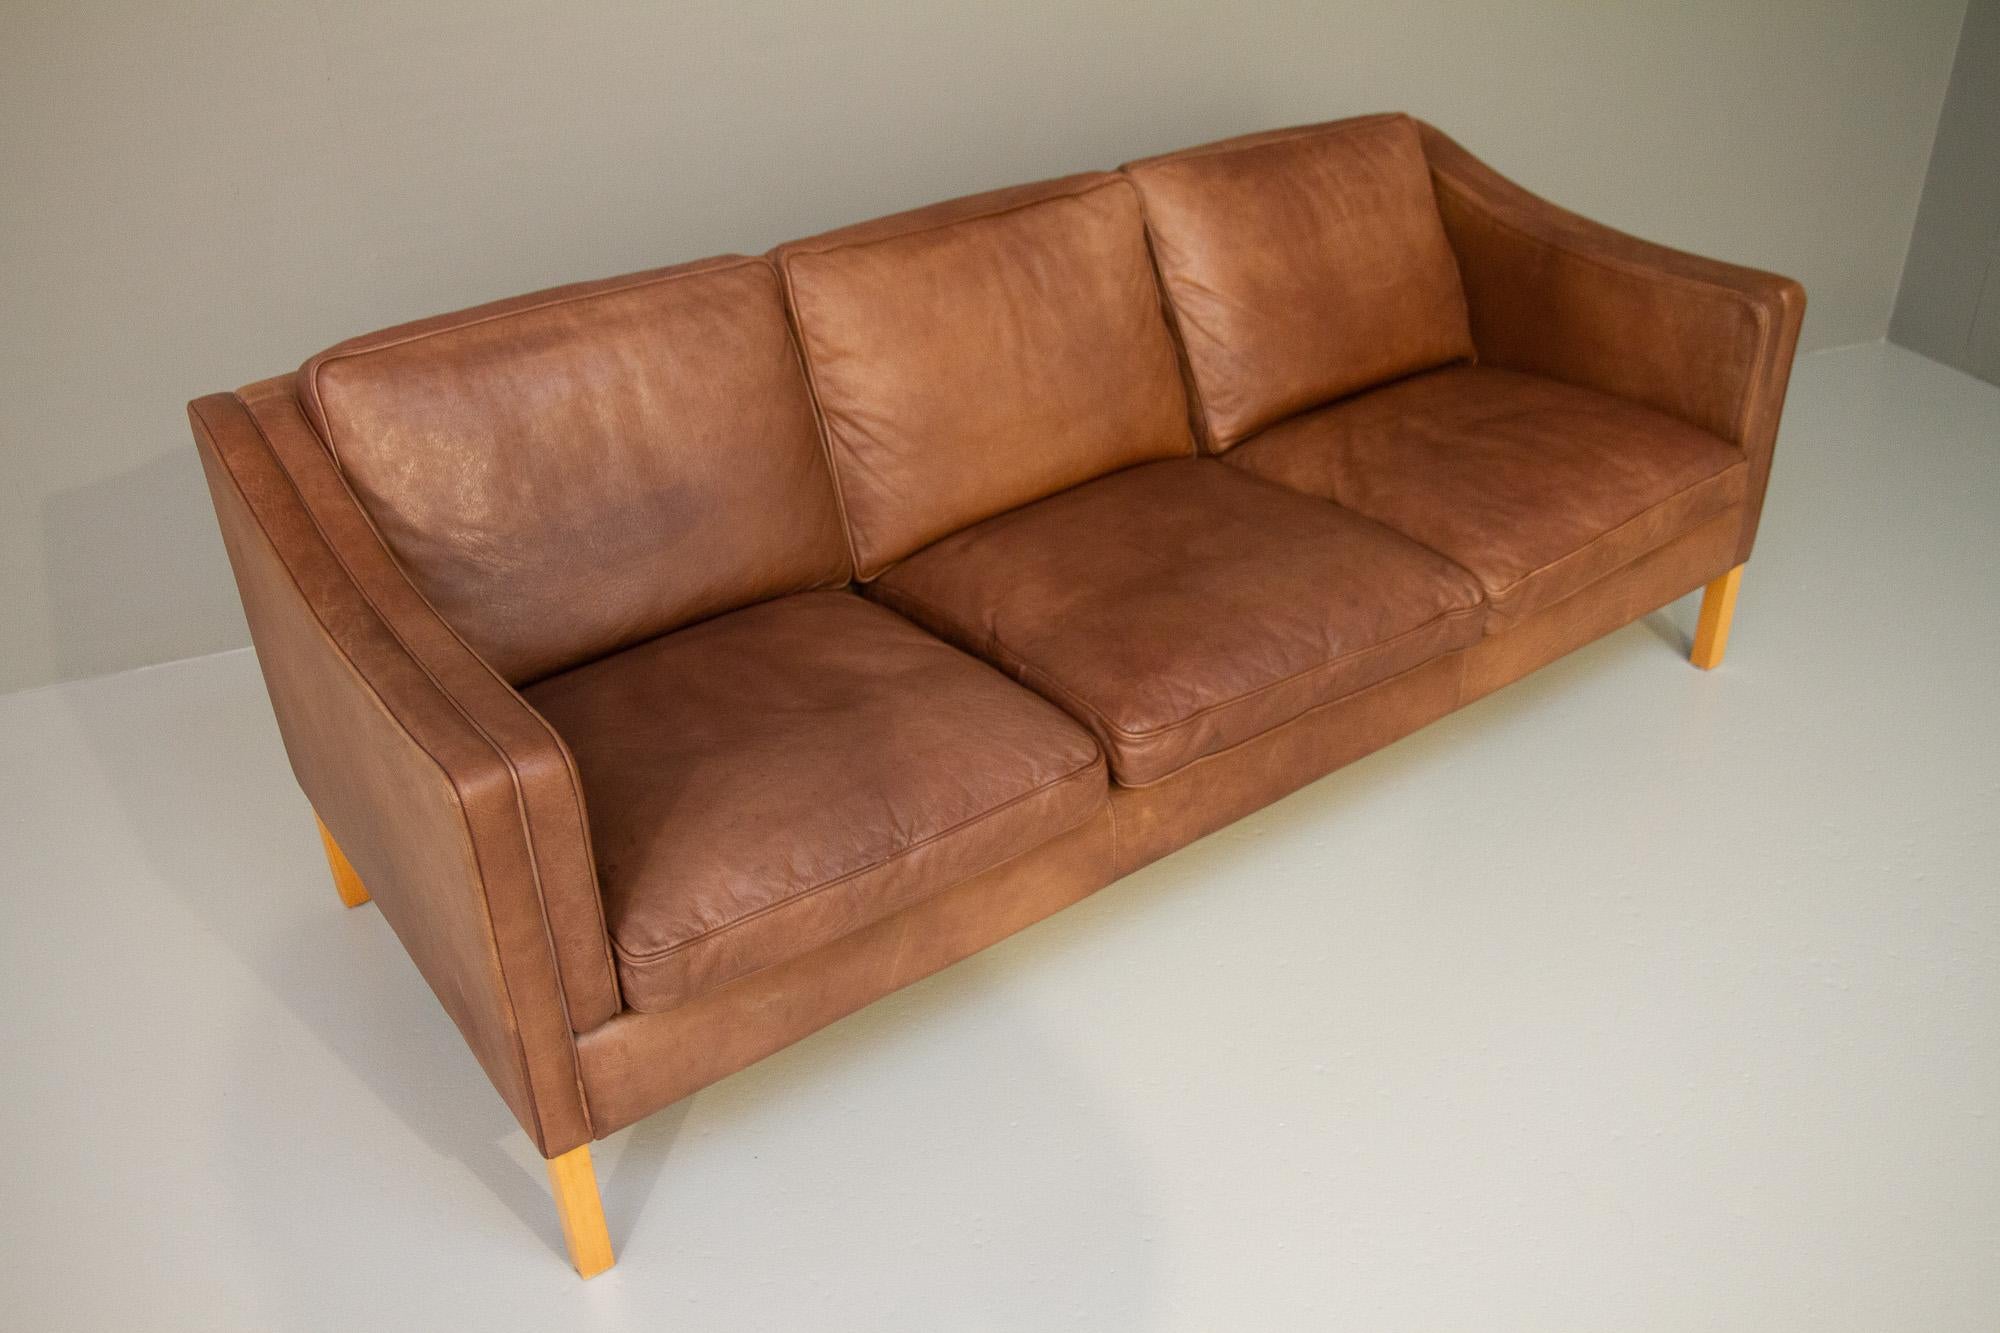 Vintage Danish Leather 3-Seater Sofa by Stouby, 1980s. 2